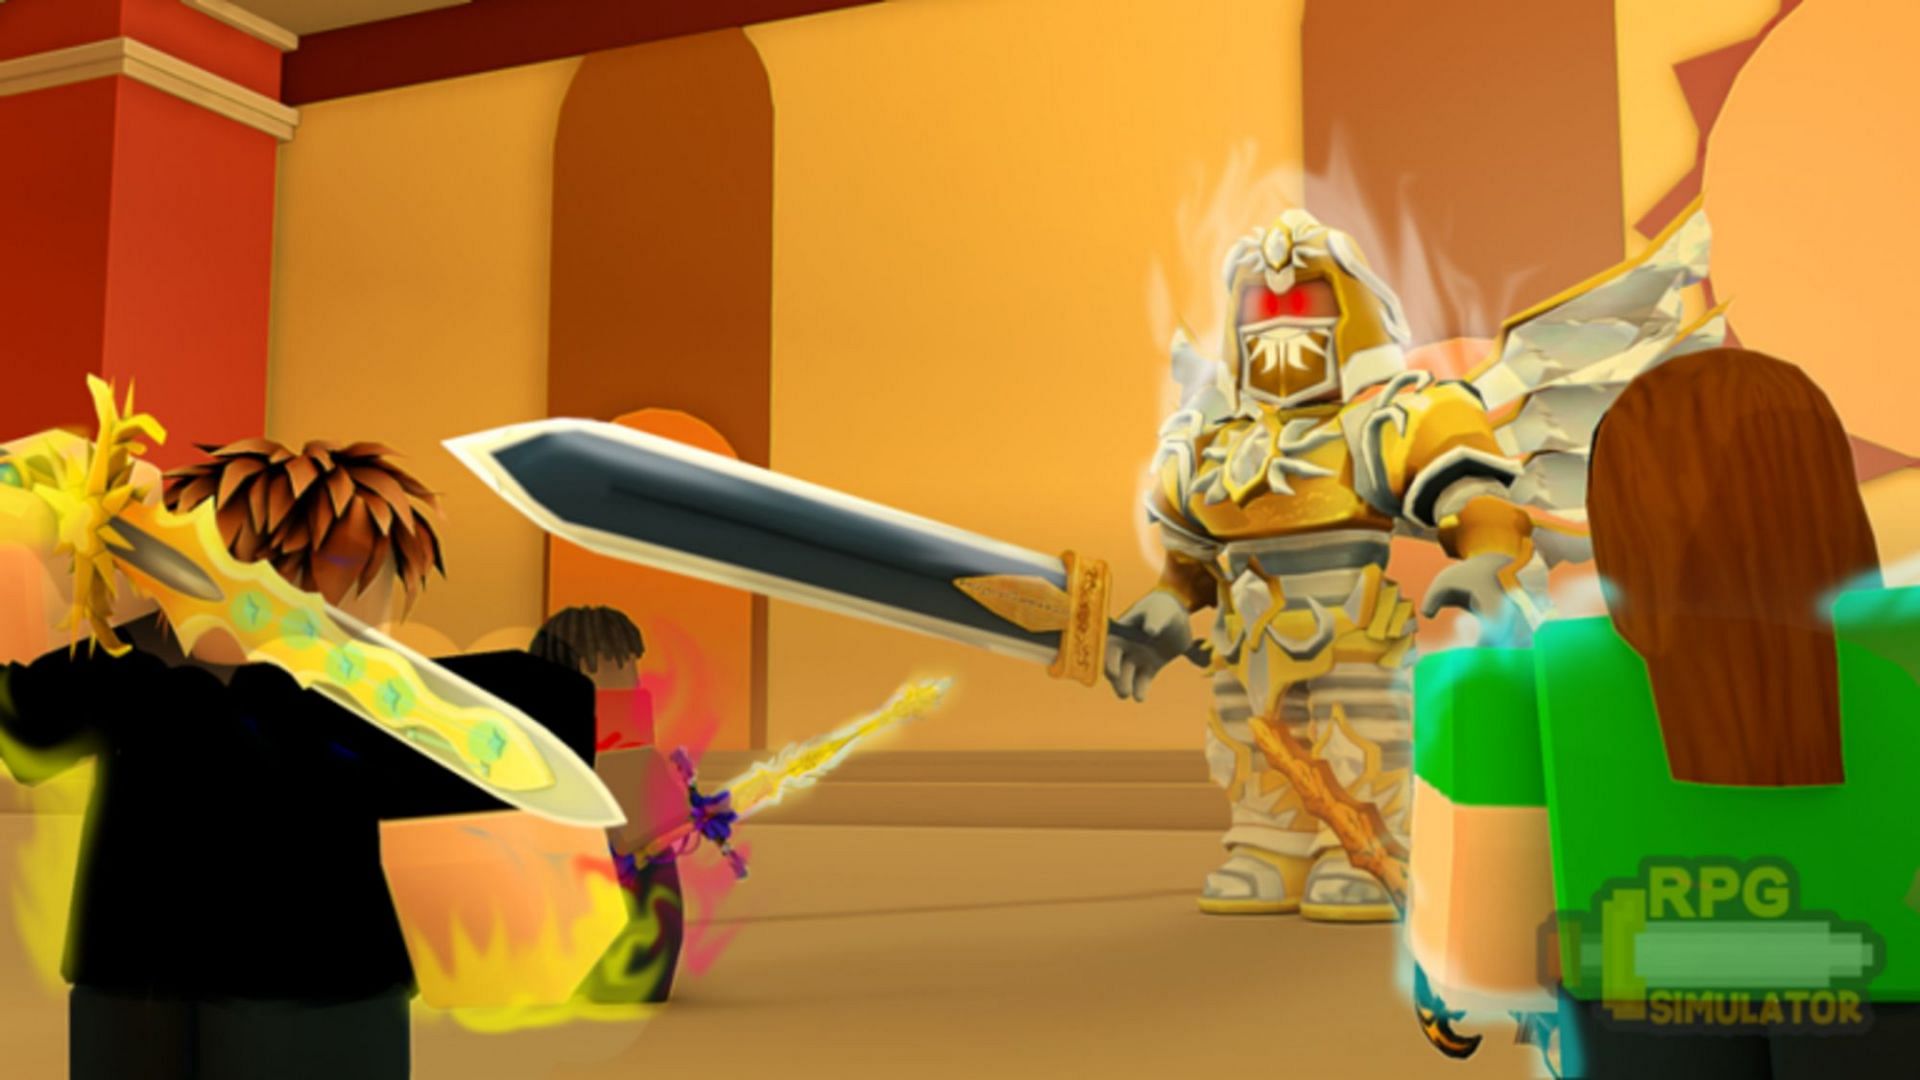 Battle dangerous monsters in the mysterious world of RPG Simulator with friends (Image via Roblox)